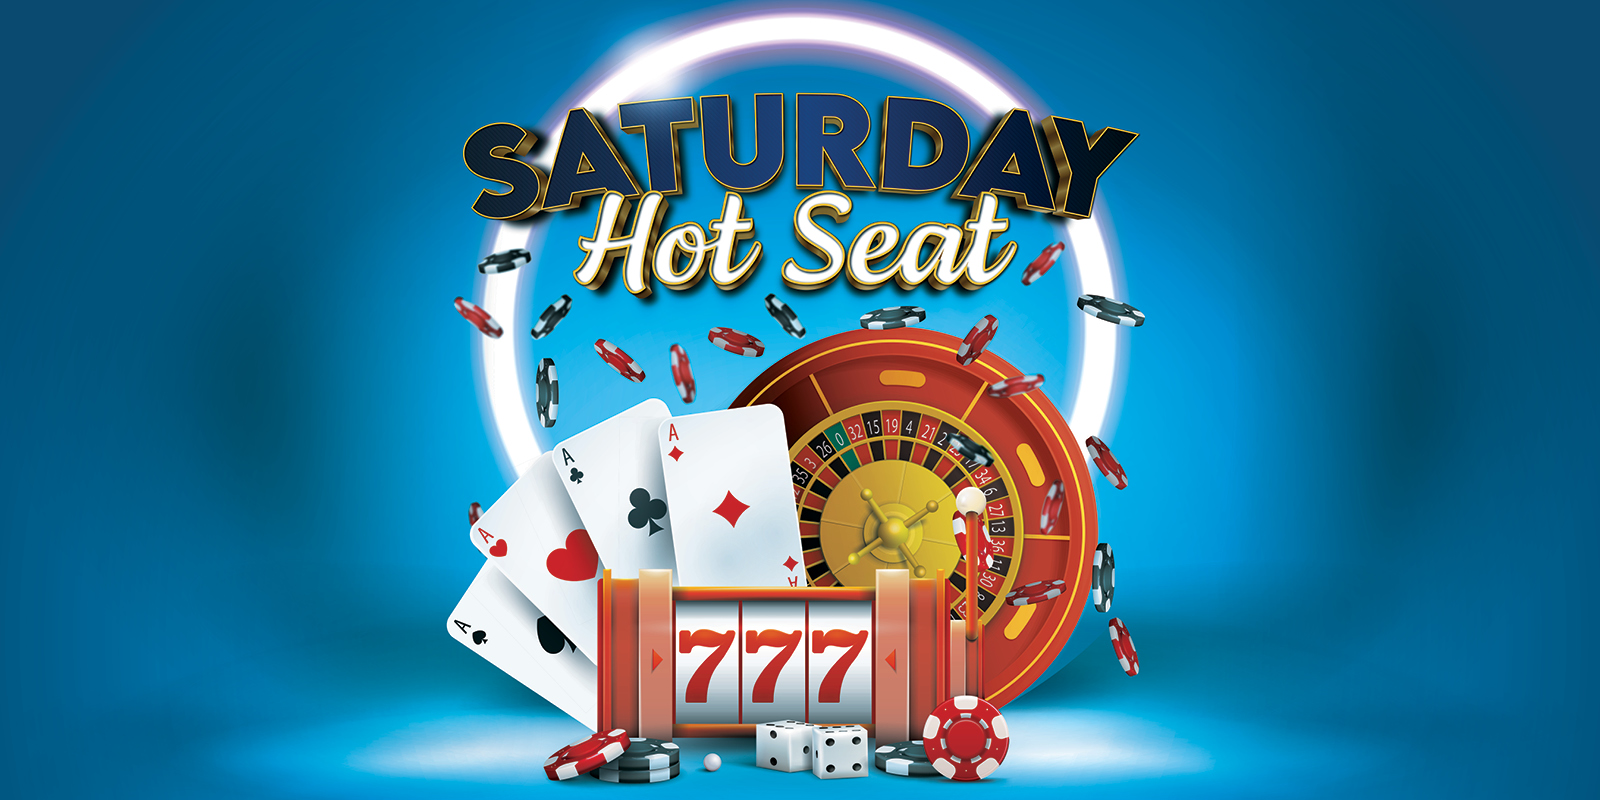 Saturday in December Floorwide Hot Seat creative showing a wheel to spin, cards and roulette